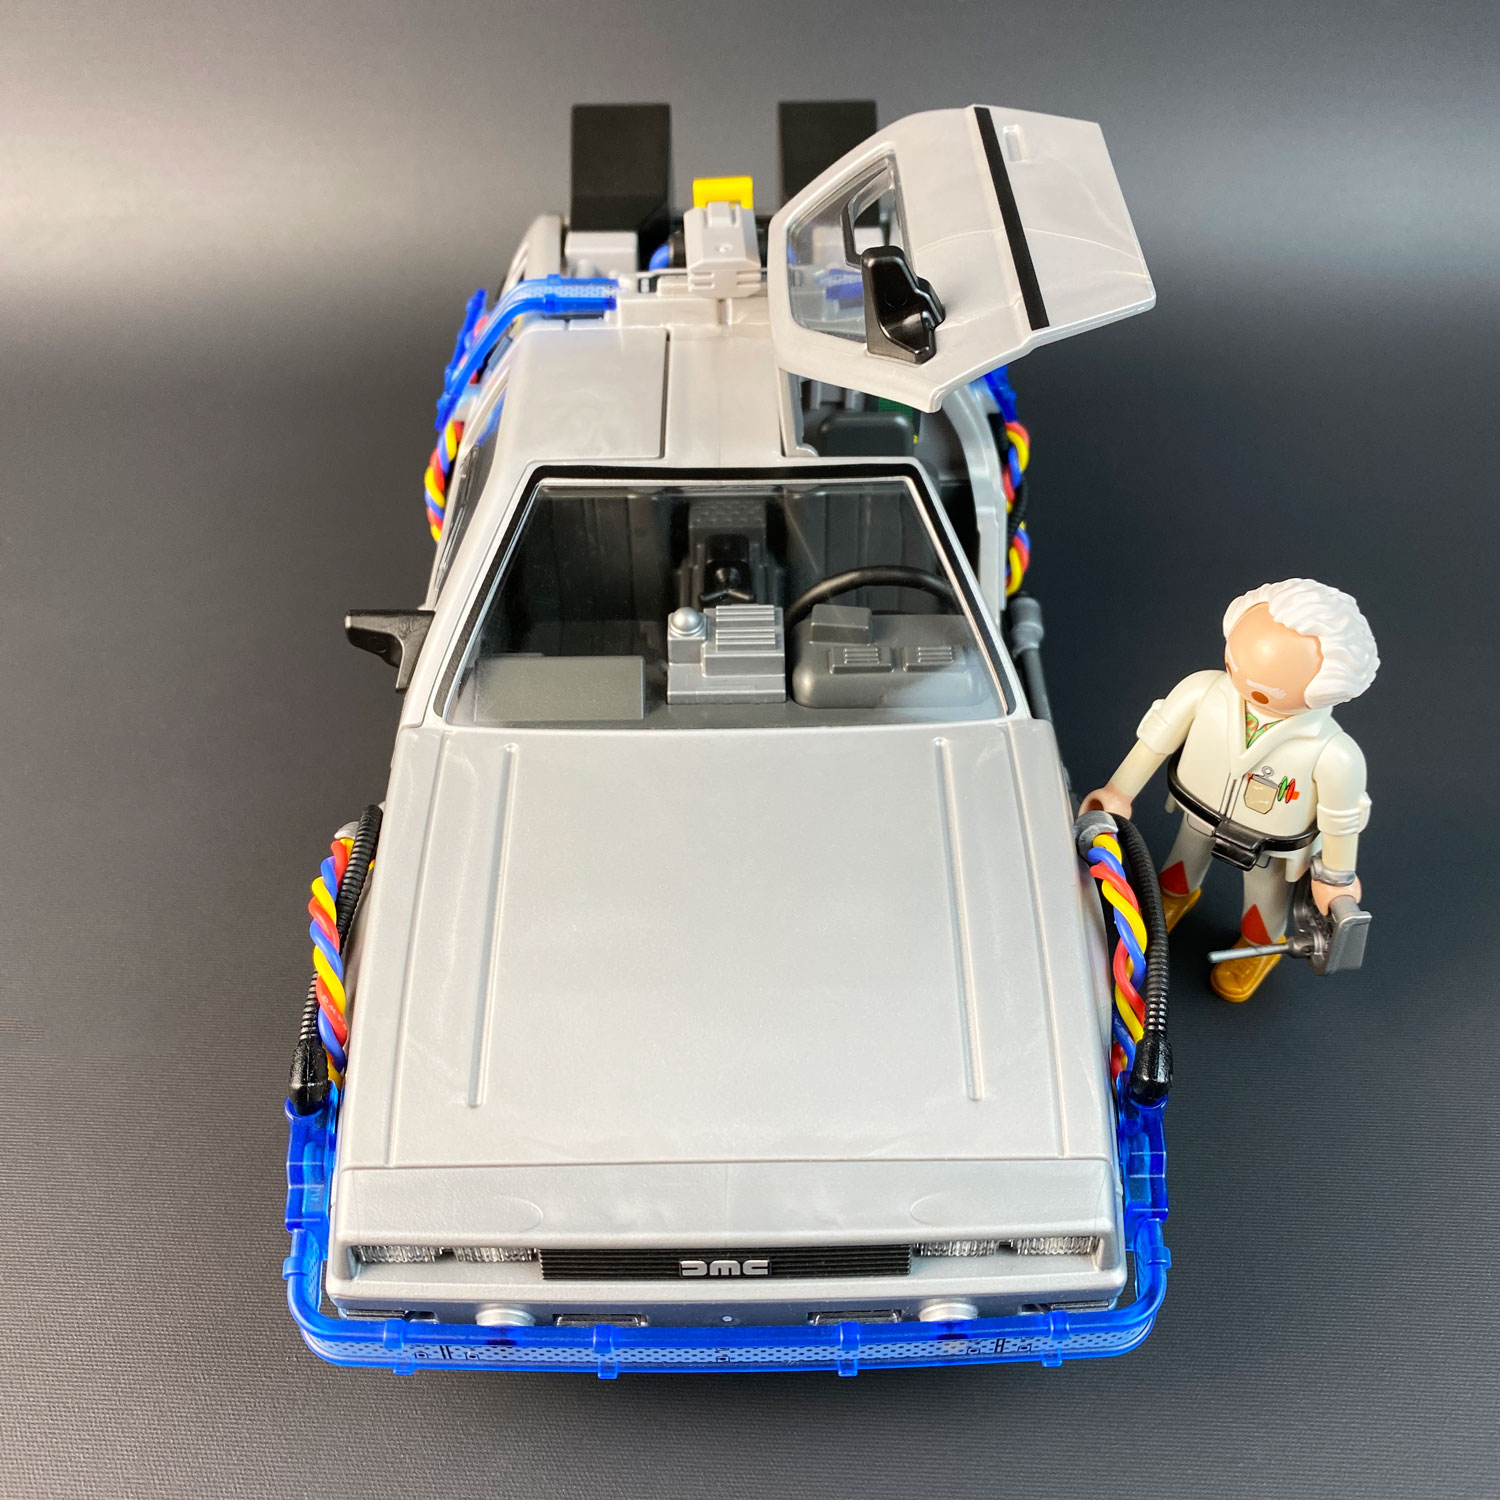 Model Playmobil DeLorean with flux wires and Doc model